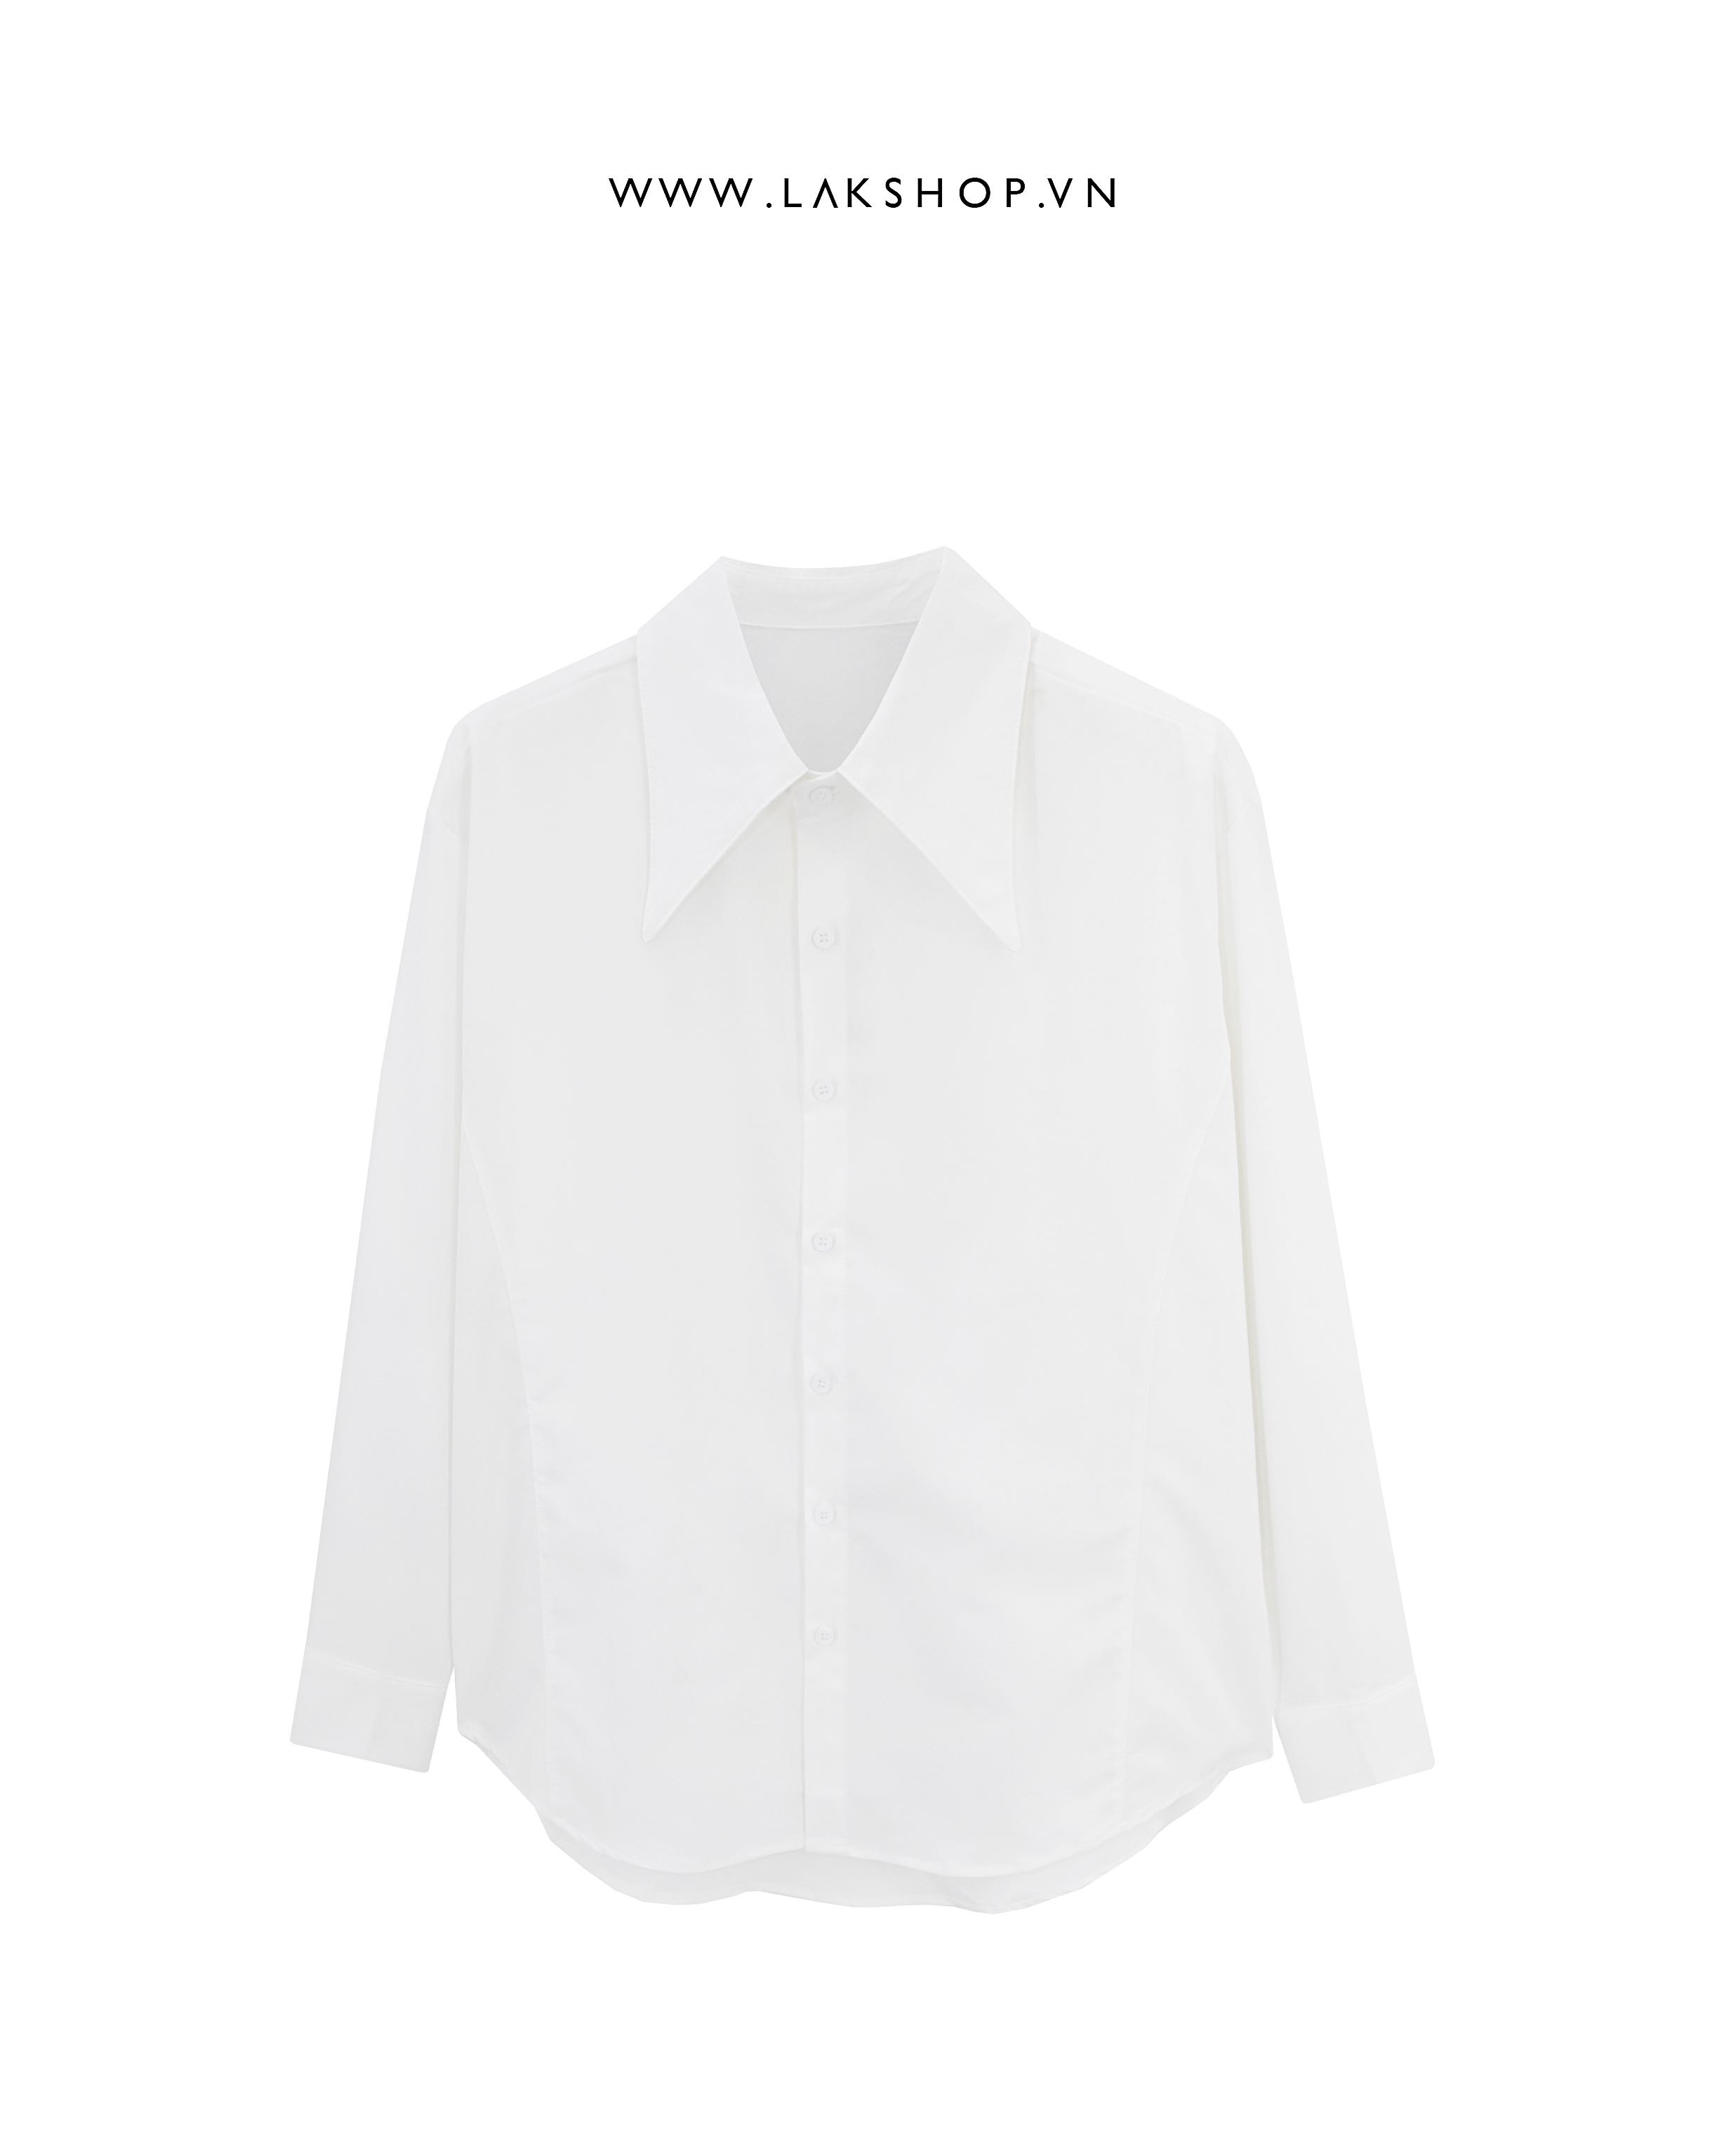 White Shirt with Large Collar